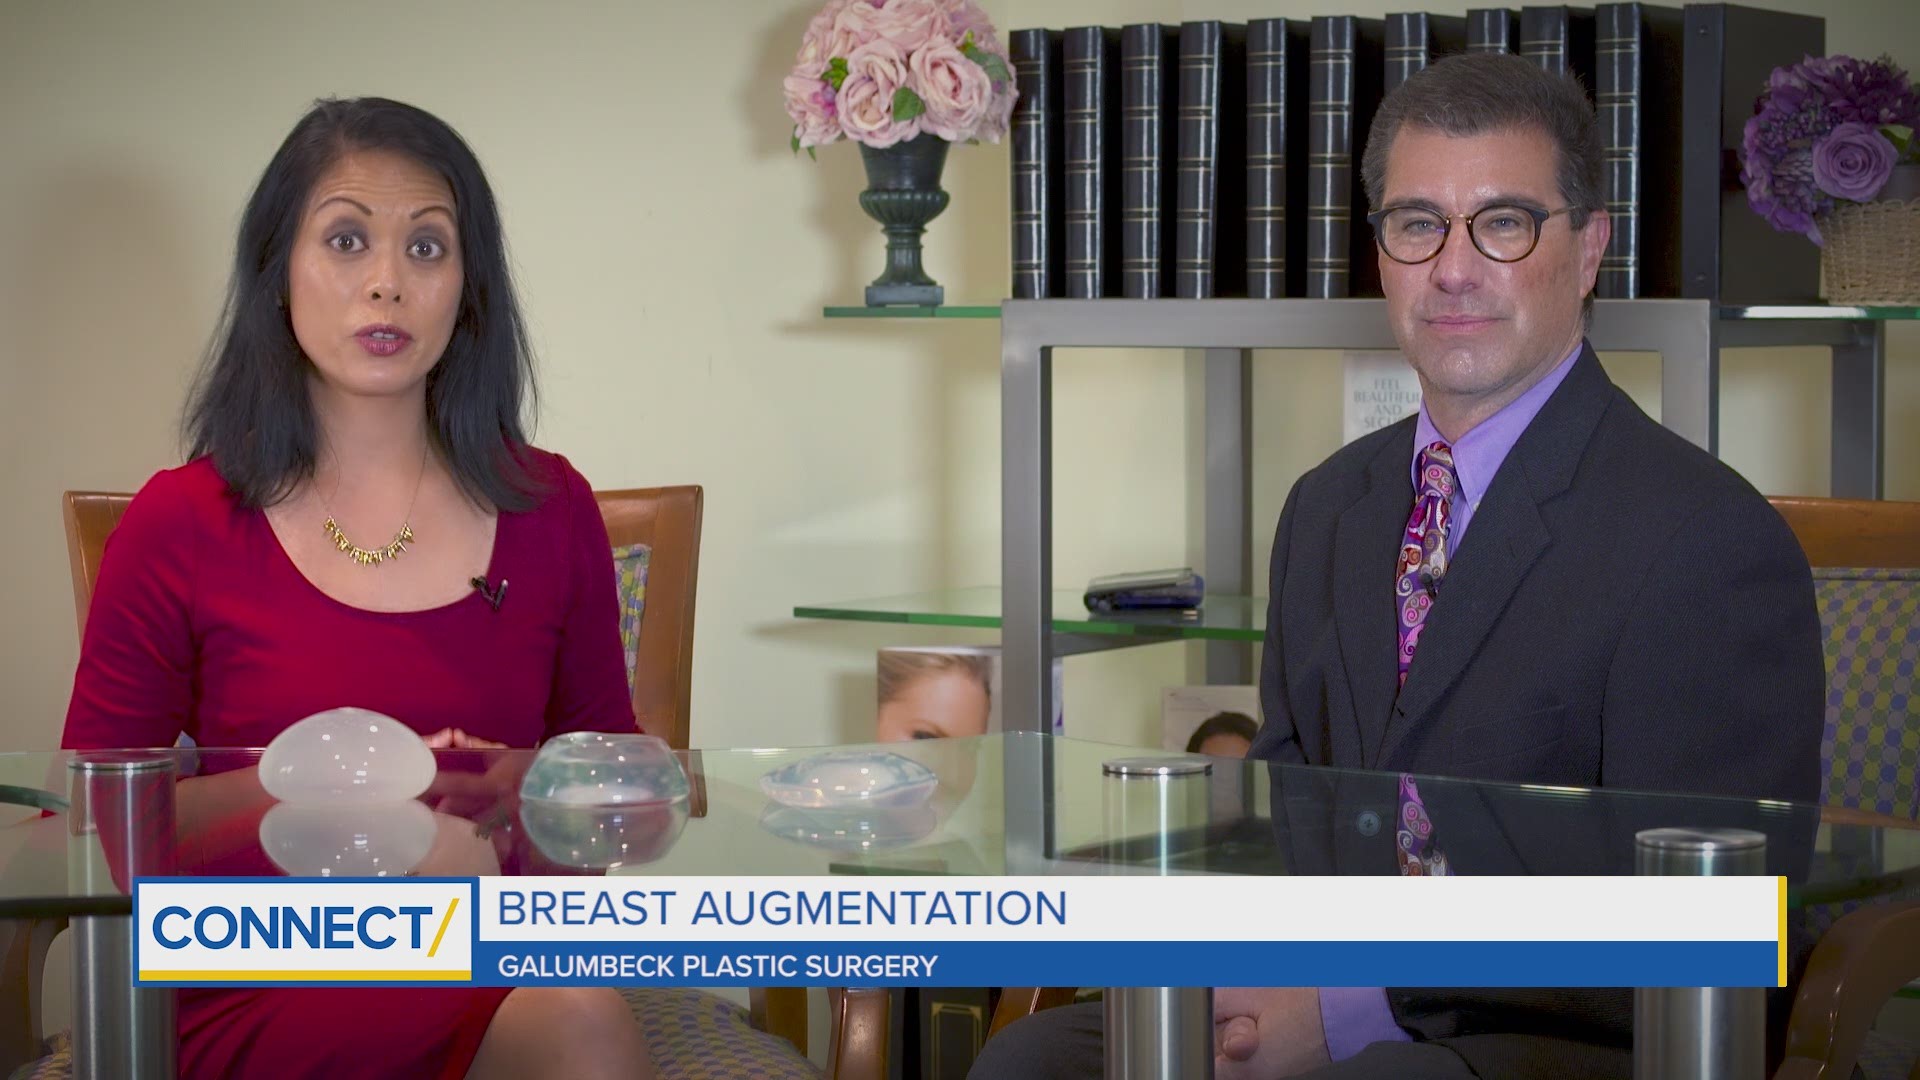 Breast augmentation is one of the most popular cosmetic procedures. We spoke with a doctor about options, and safety tips to consider before going under the knife.